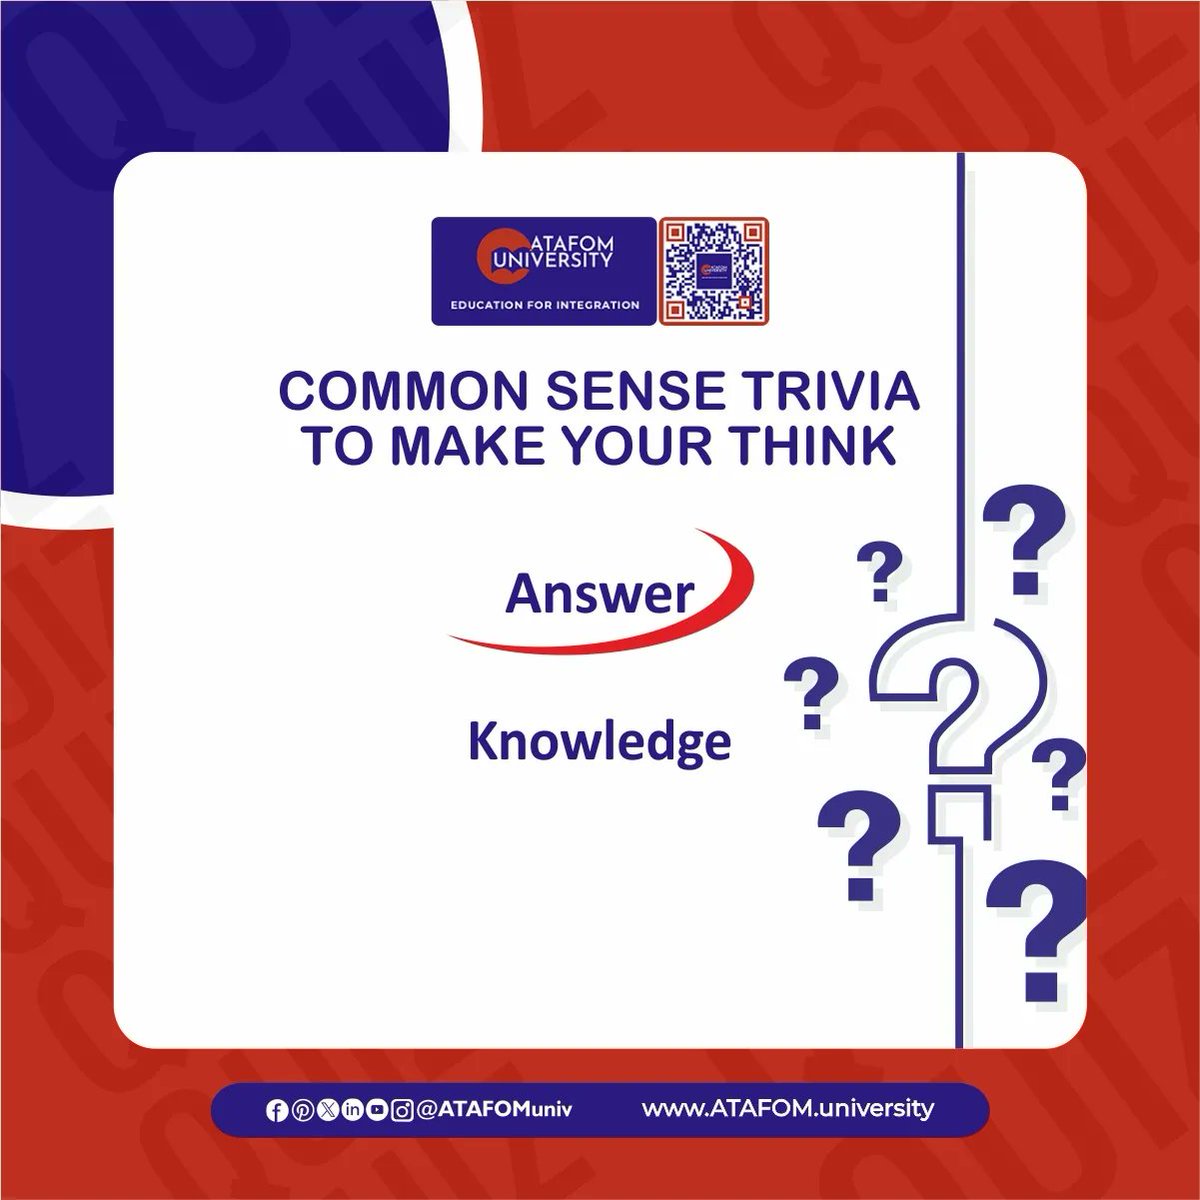 Common Sense Trivia to make your Think🧠

➡️ What is the one thing that increases the more you share it?
• Water
• Money
• Images
• Knowledge 

Answer - Knowledge✅

Visit Our Website: ATAFOM.university

#ATAFOM
#ATAFOMuniversity
#SakirYavuz
#QuizChallenge…